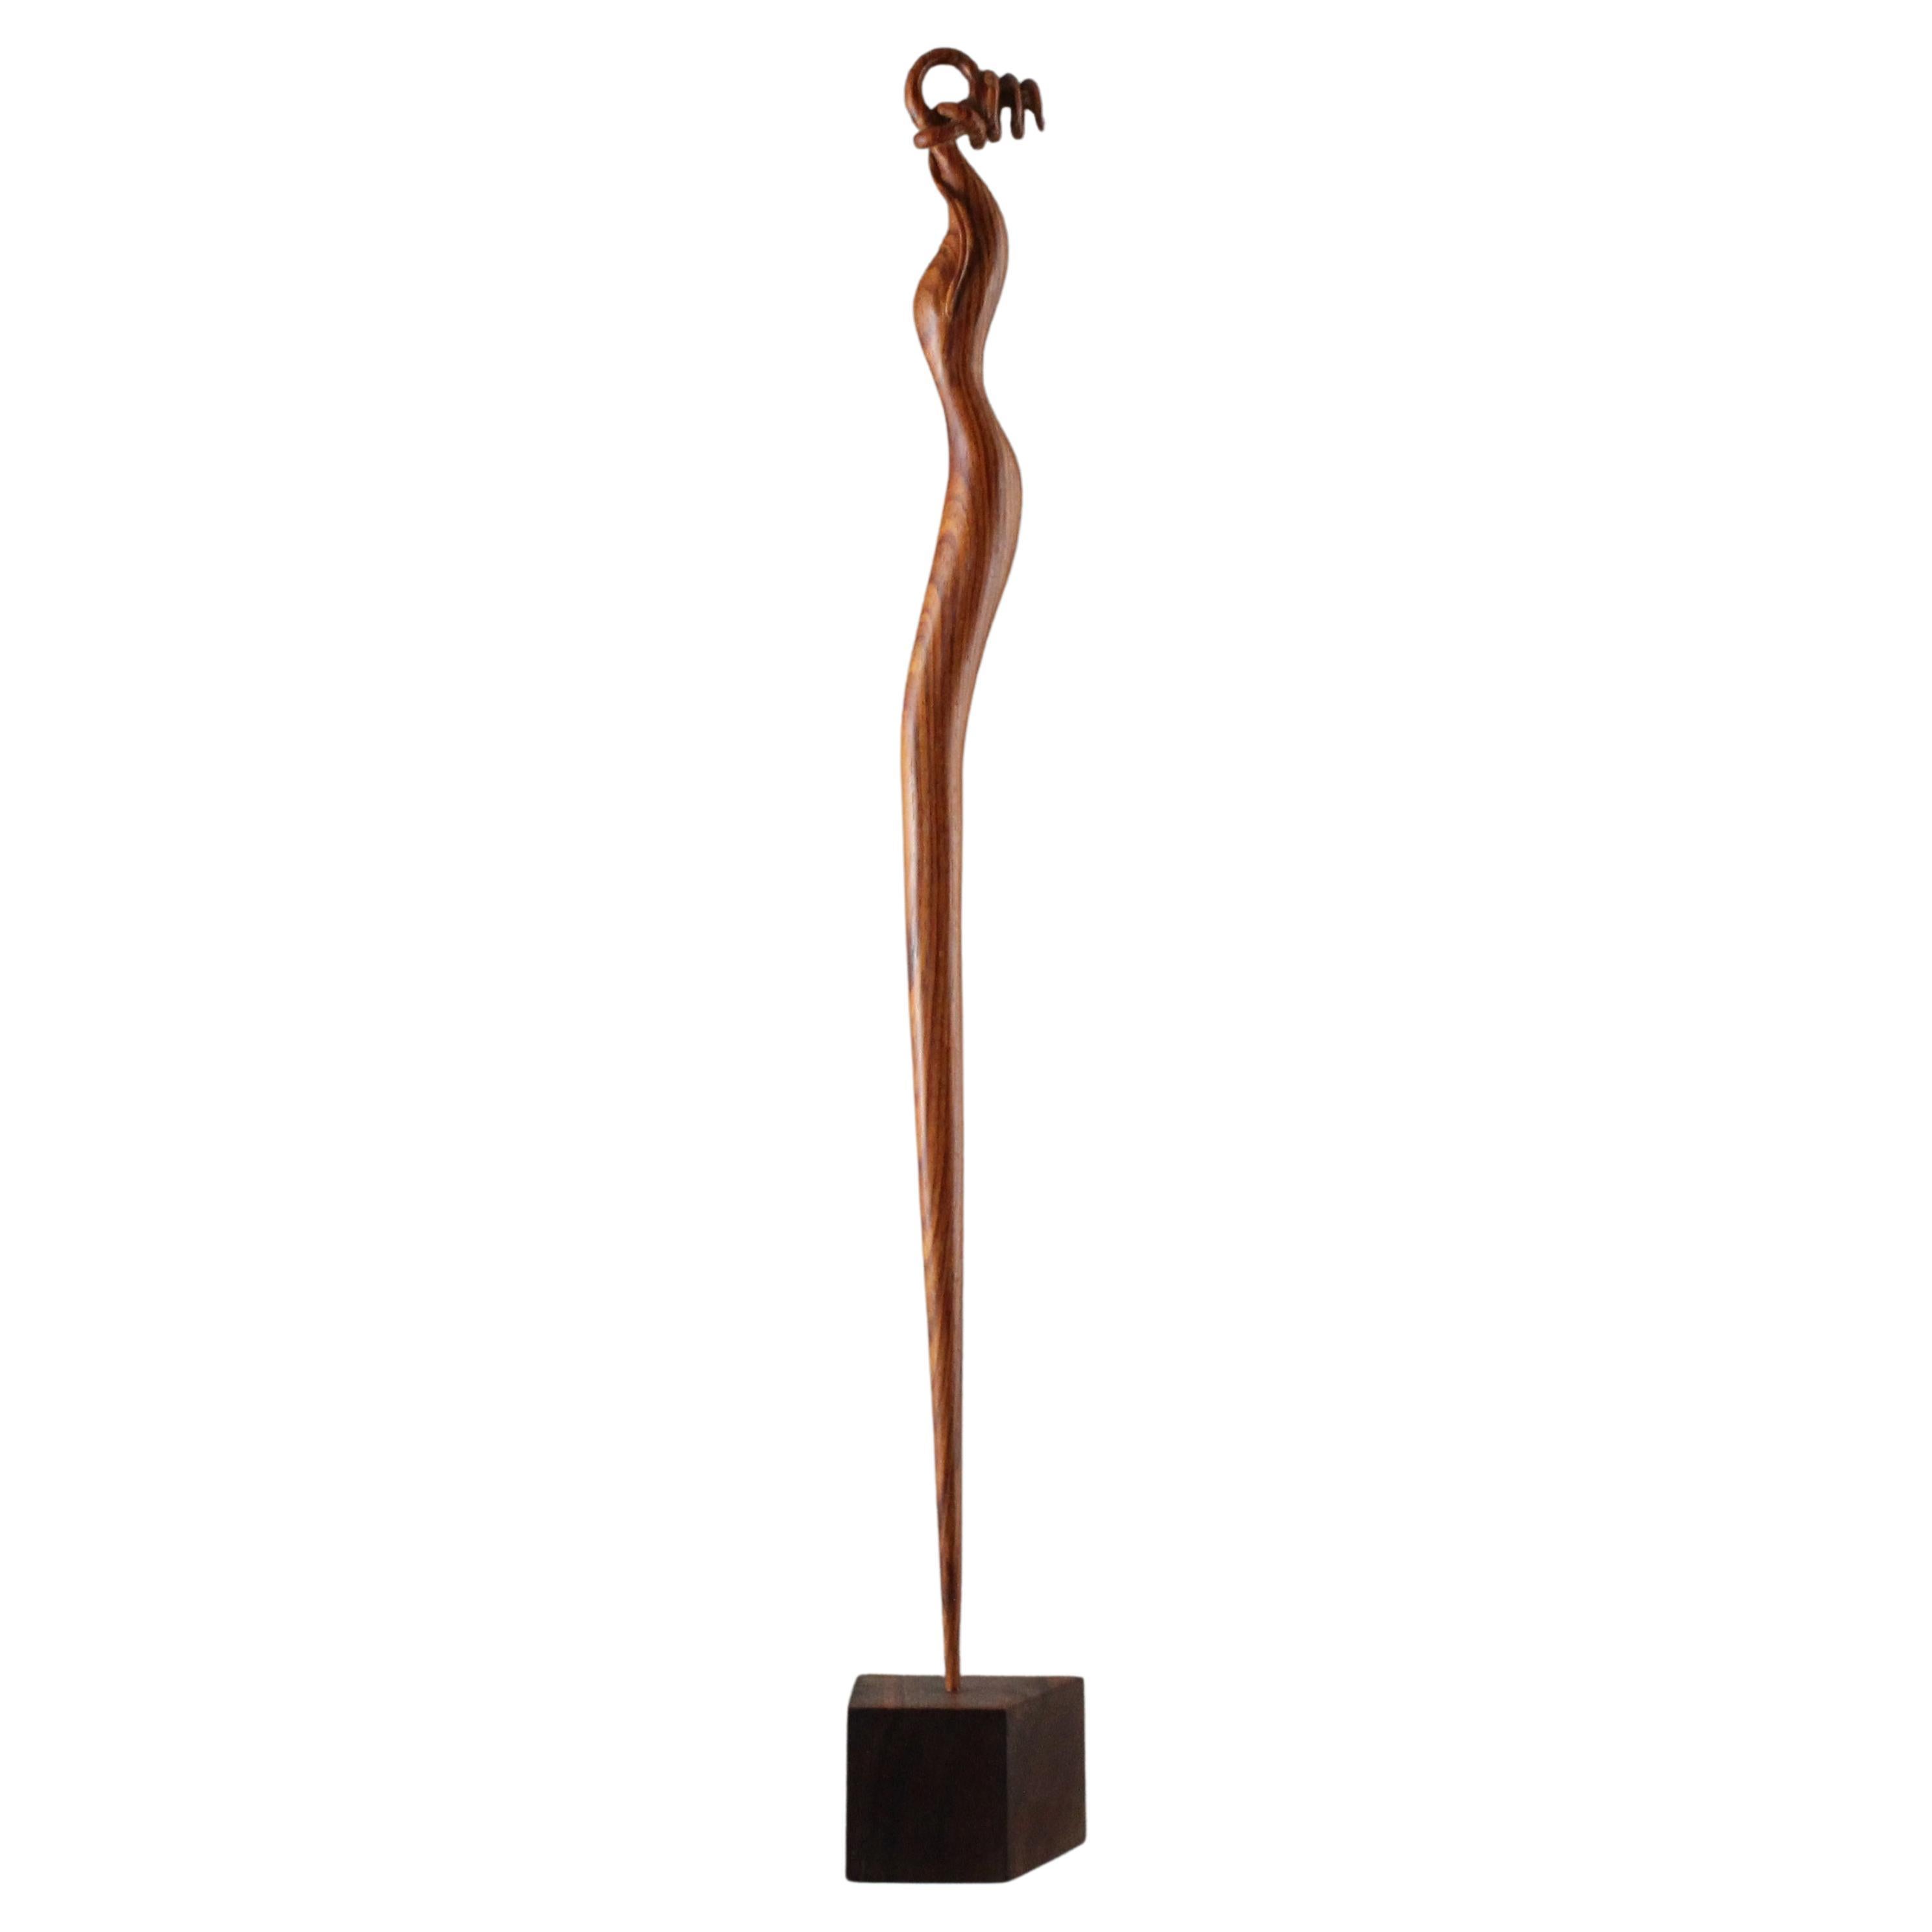 Untitled, Cocobolo Wood sculpture by Nairi Safaryan